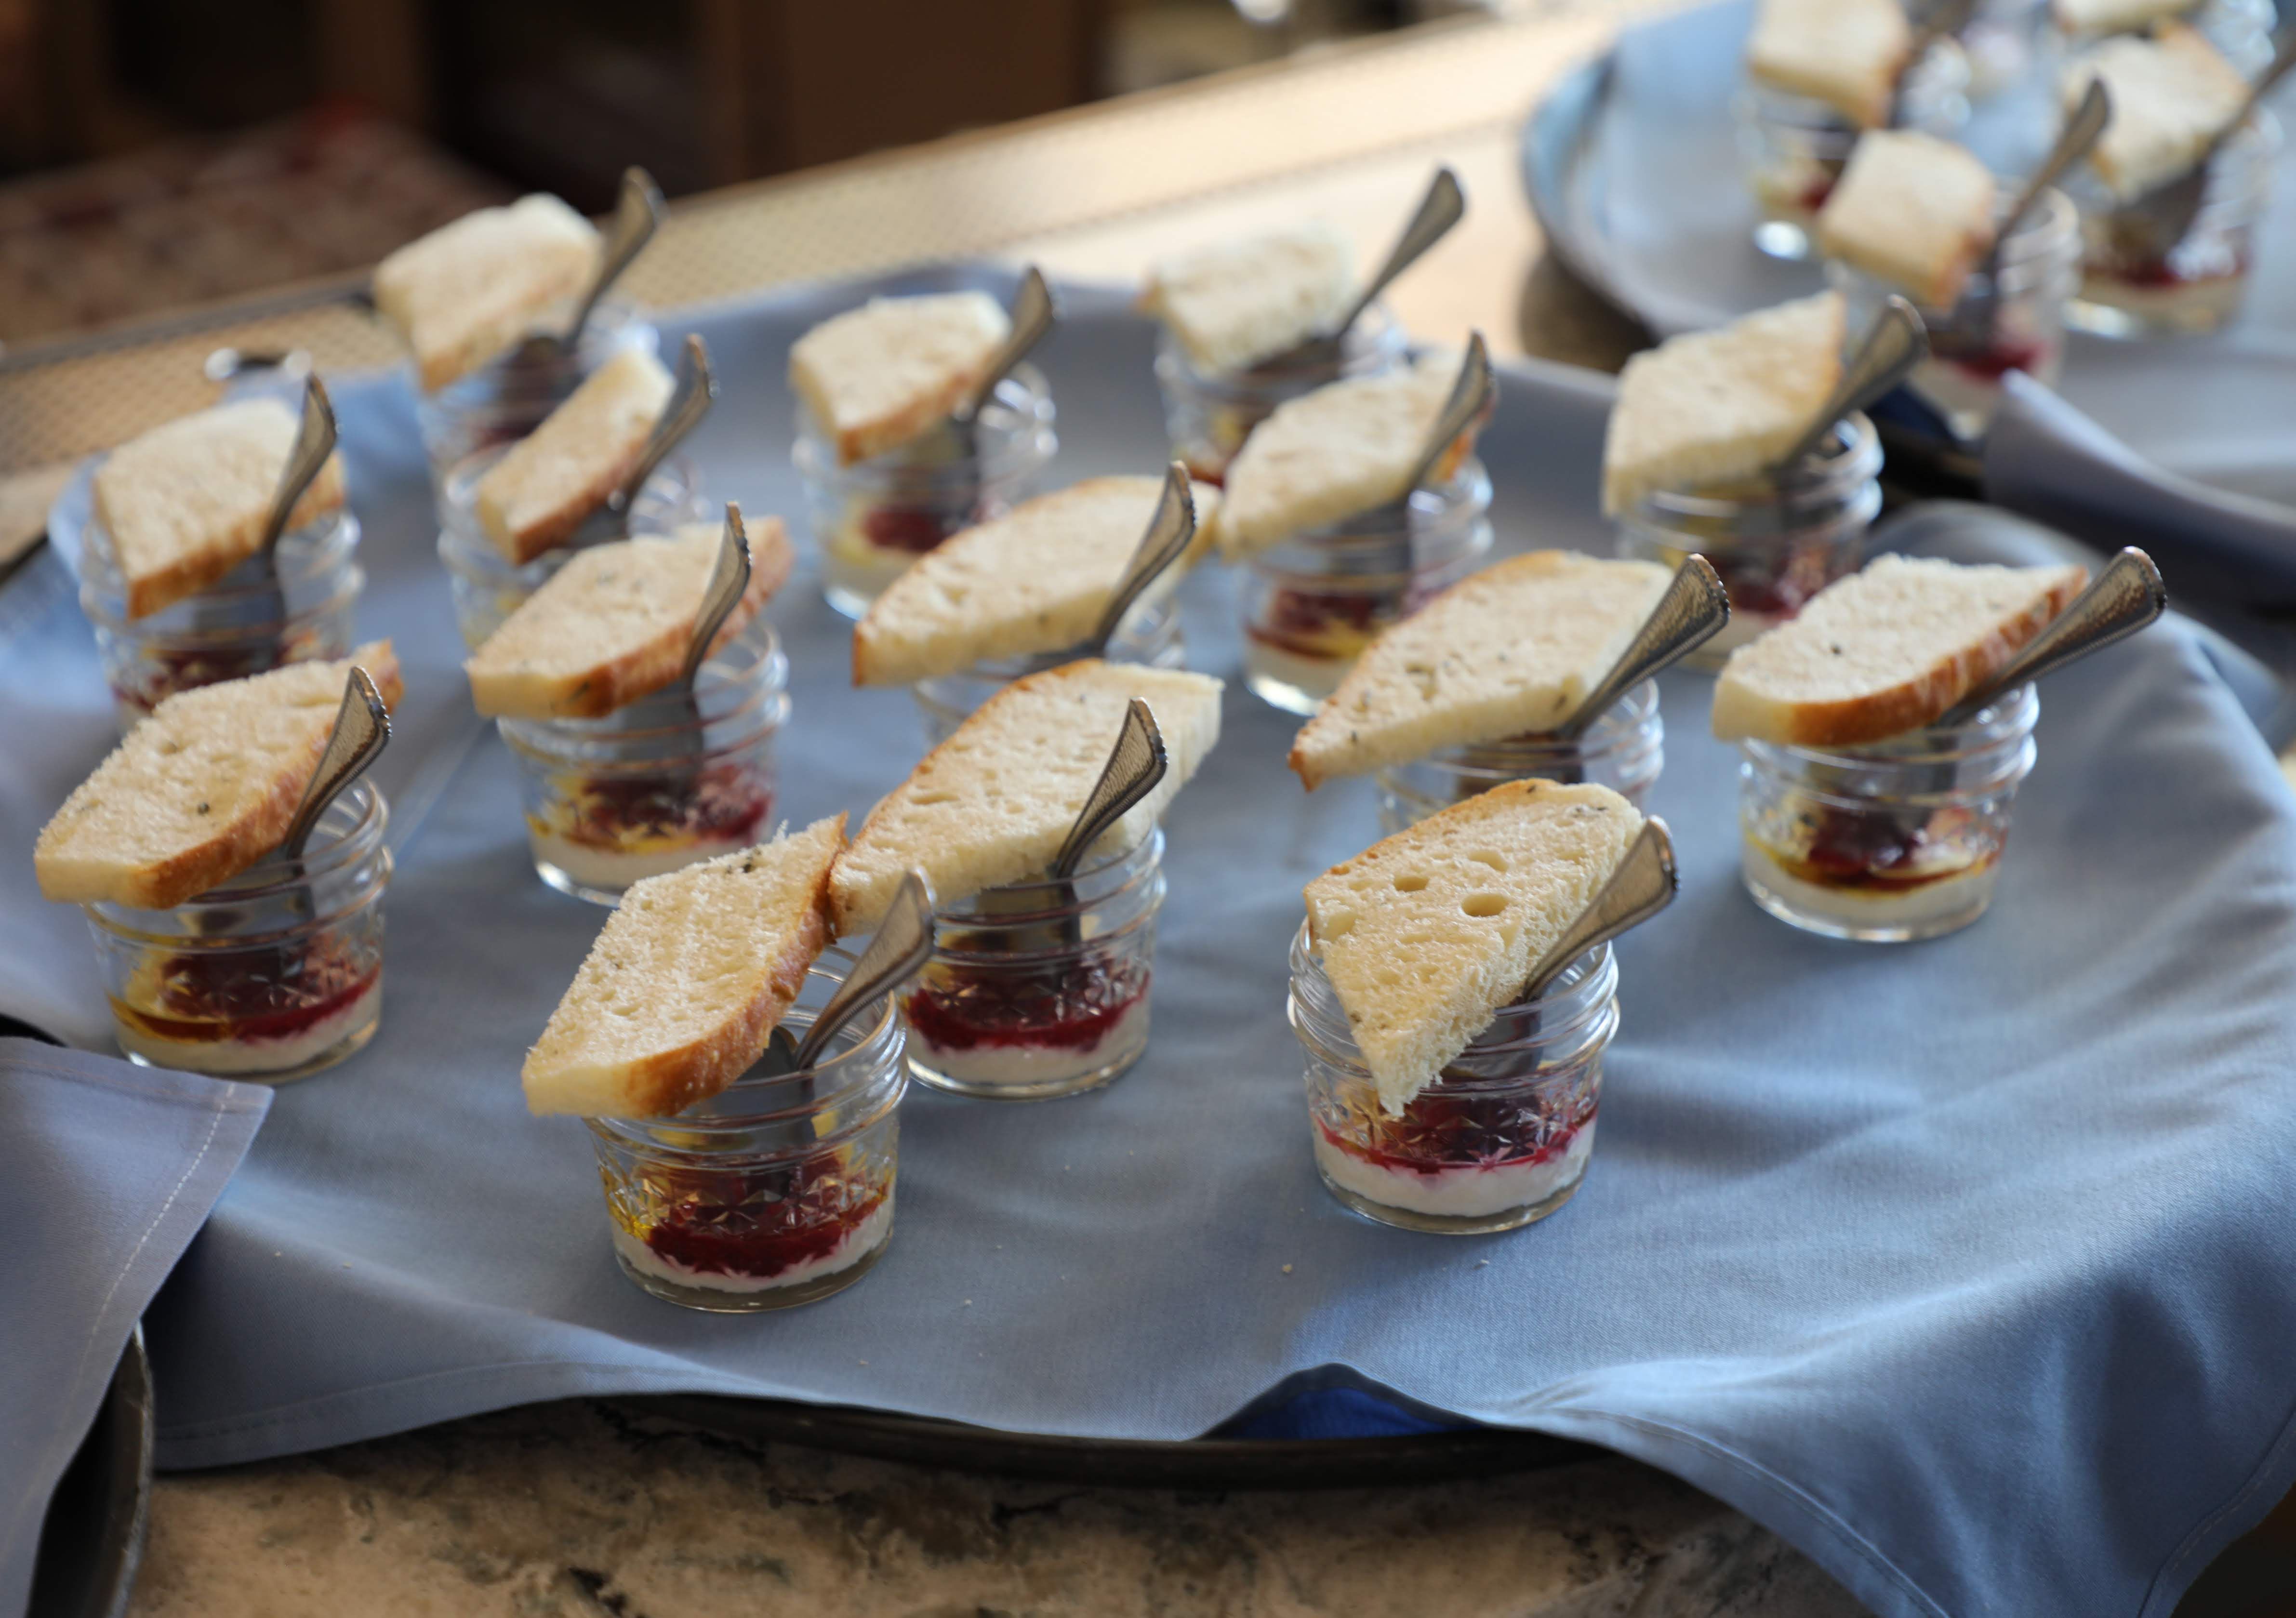 Hors d'oeuvres ready to be served